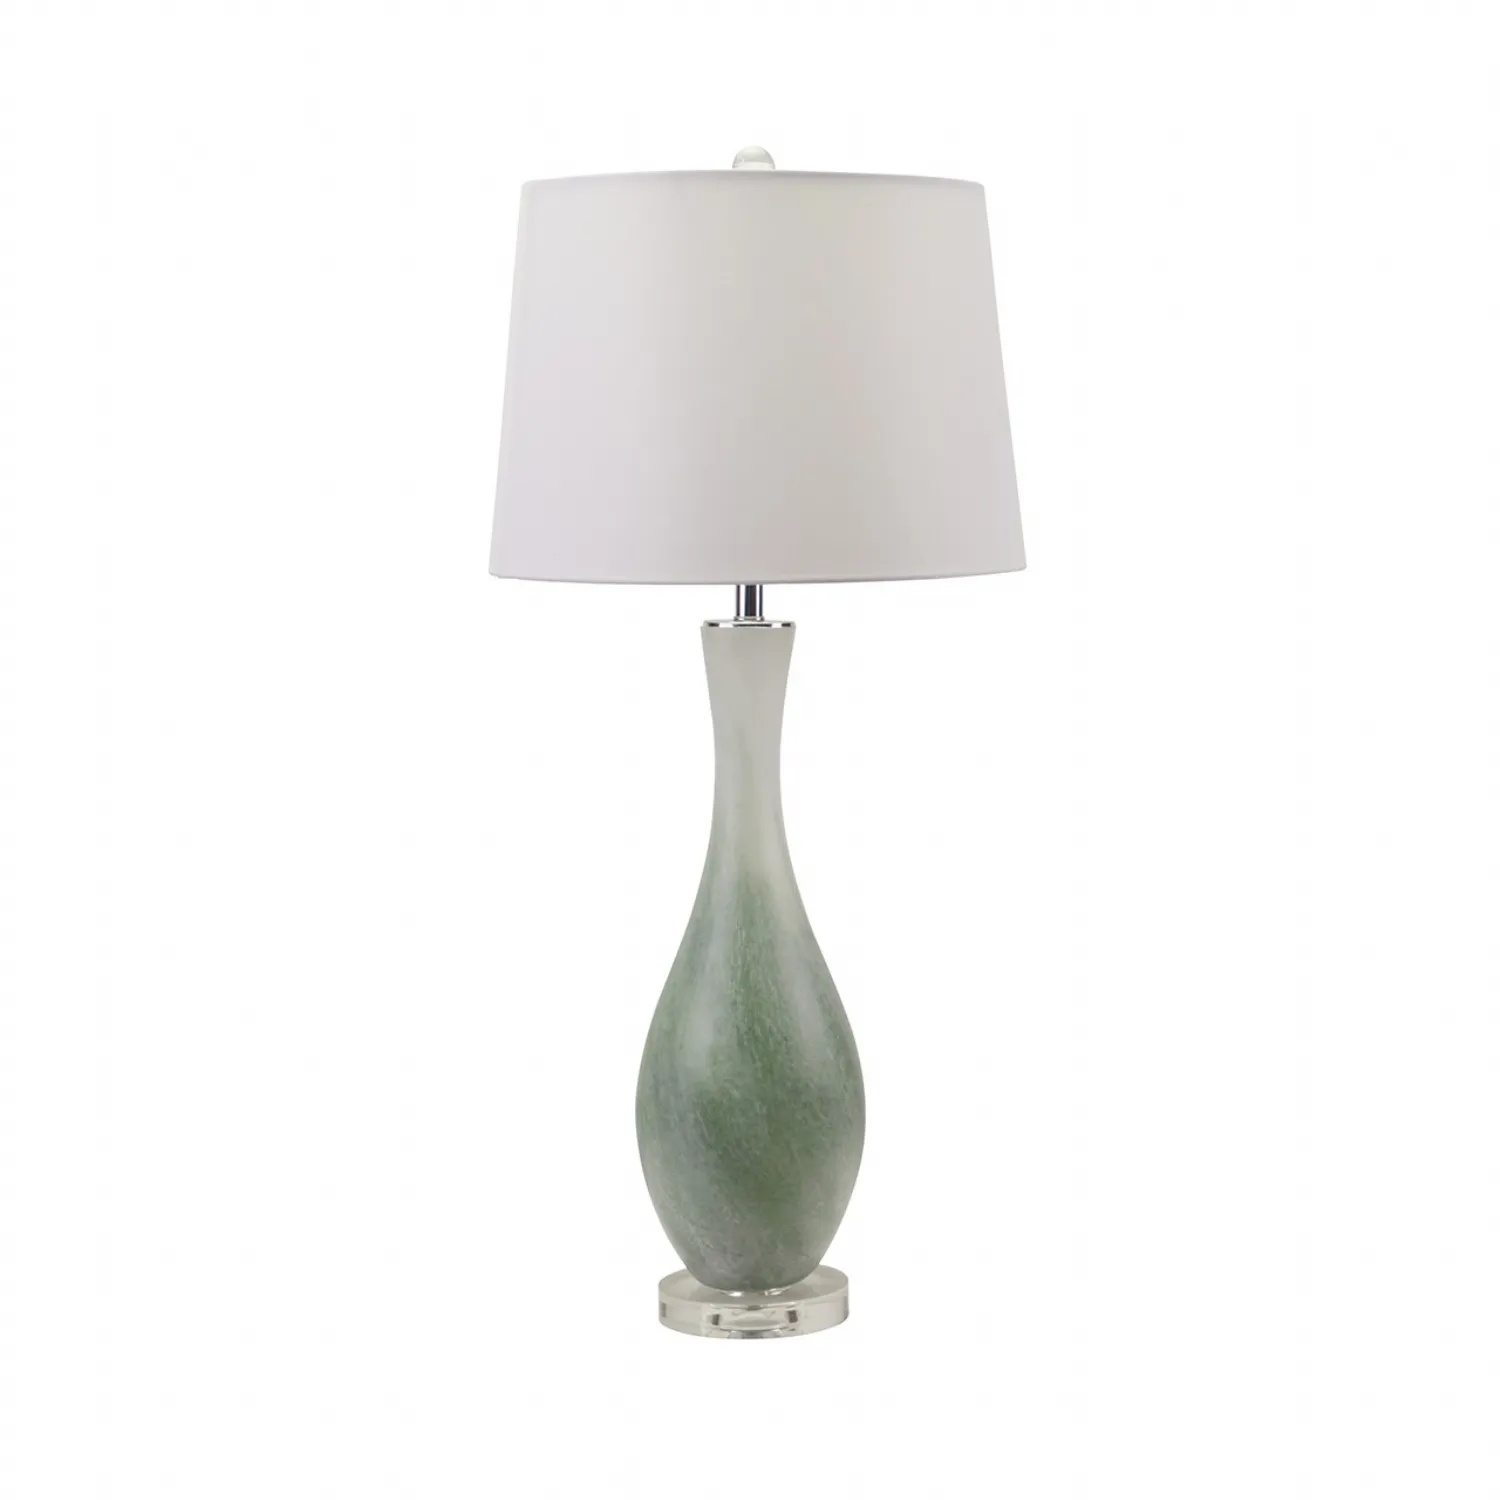 76cm Light Green And White Glass Table Lamp